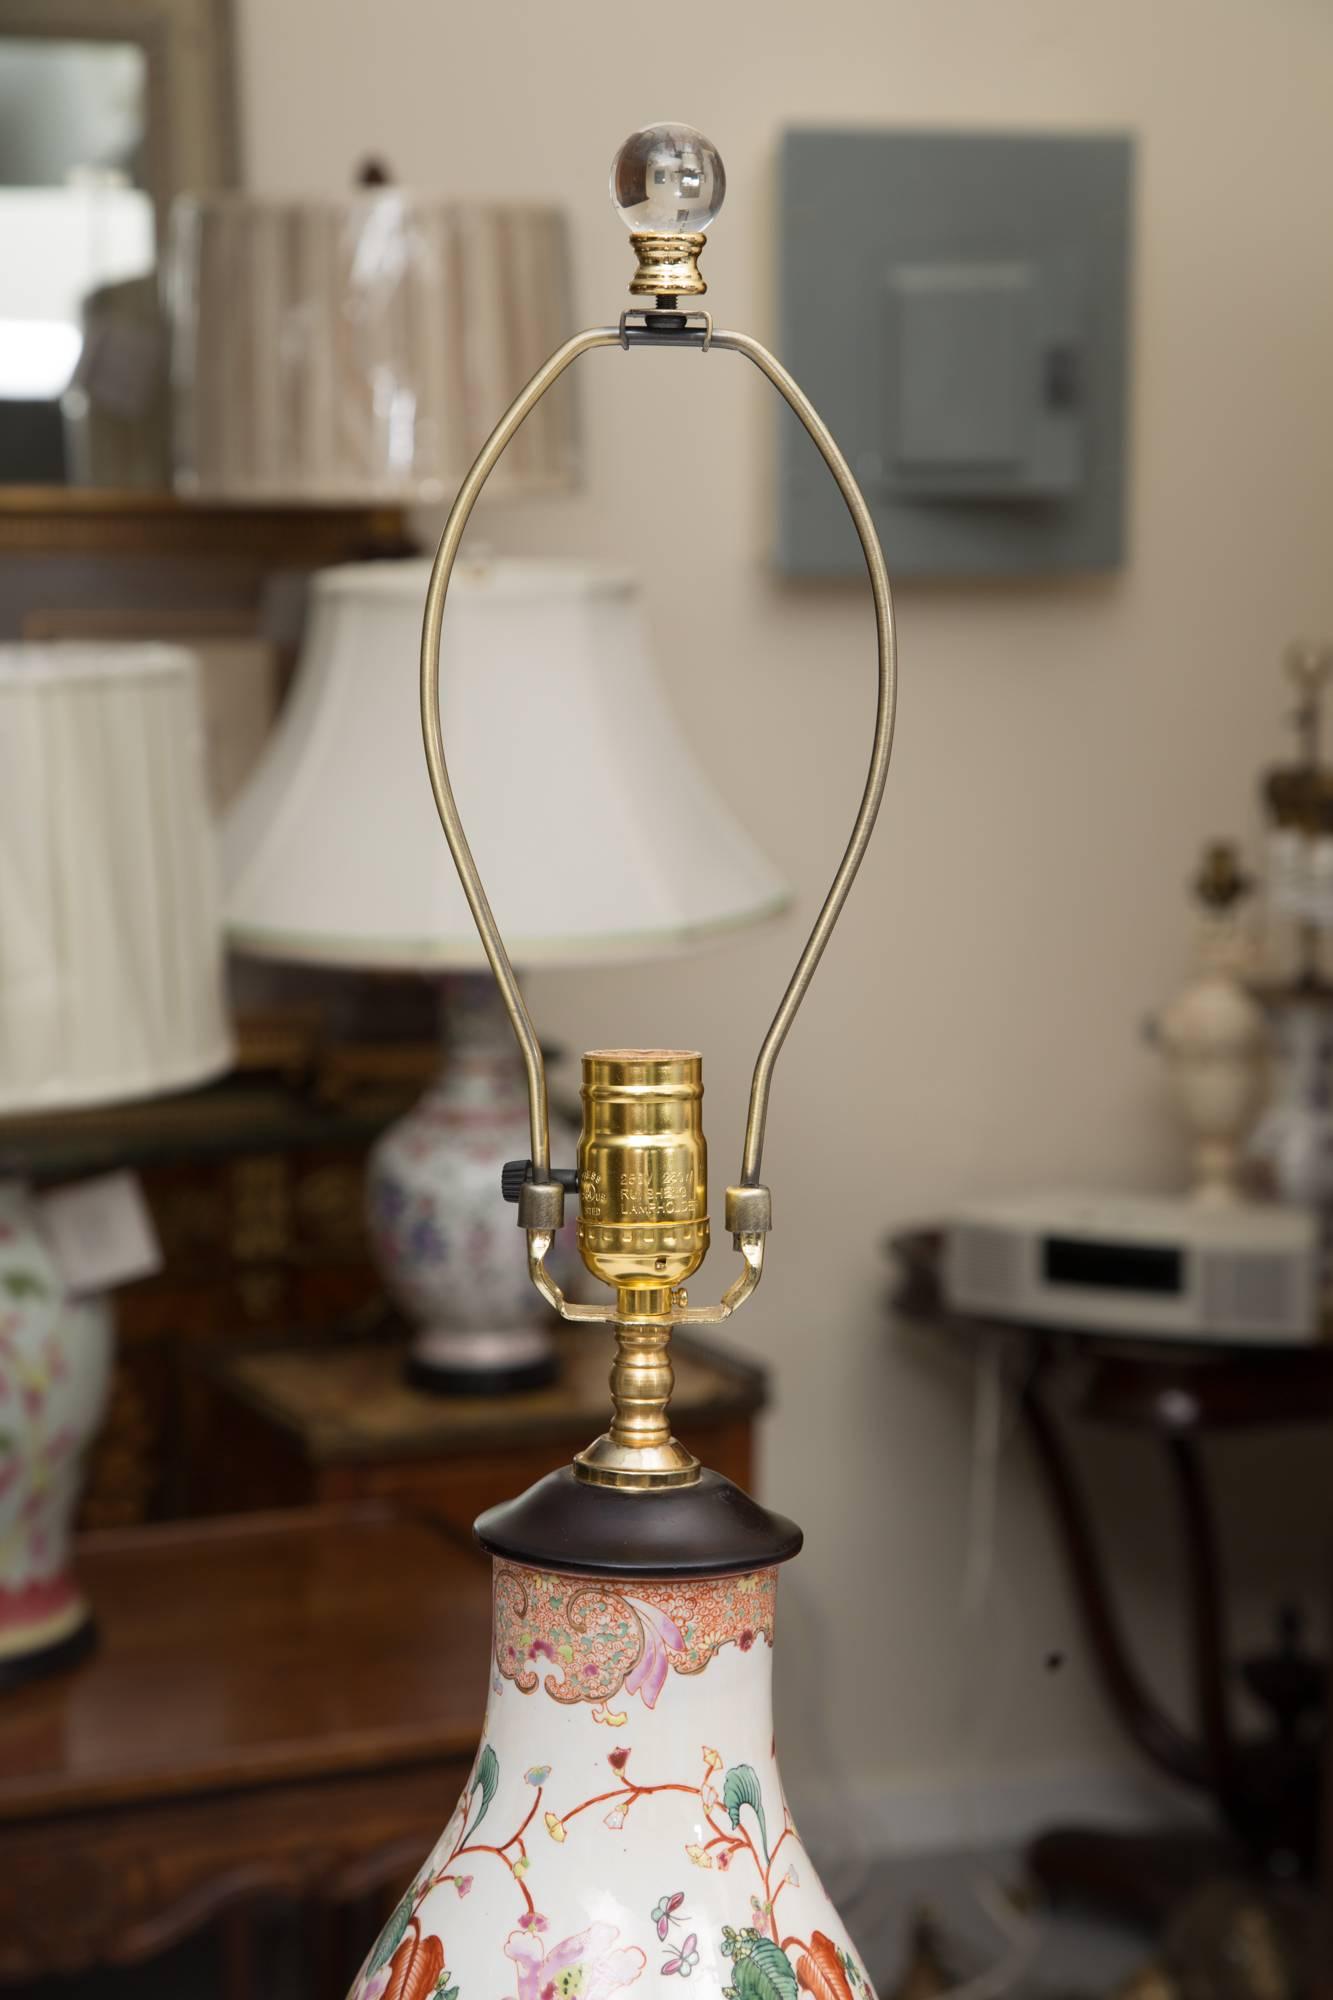 This pair of gourd shaped table lamps has a white background hand-painted with a floral design in the French manner.